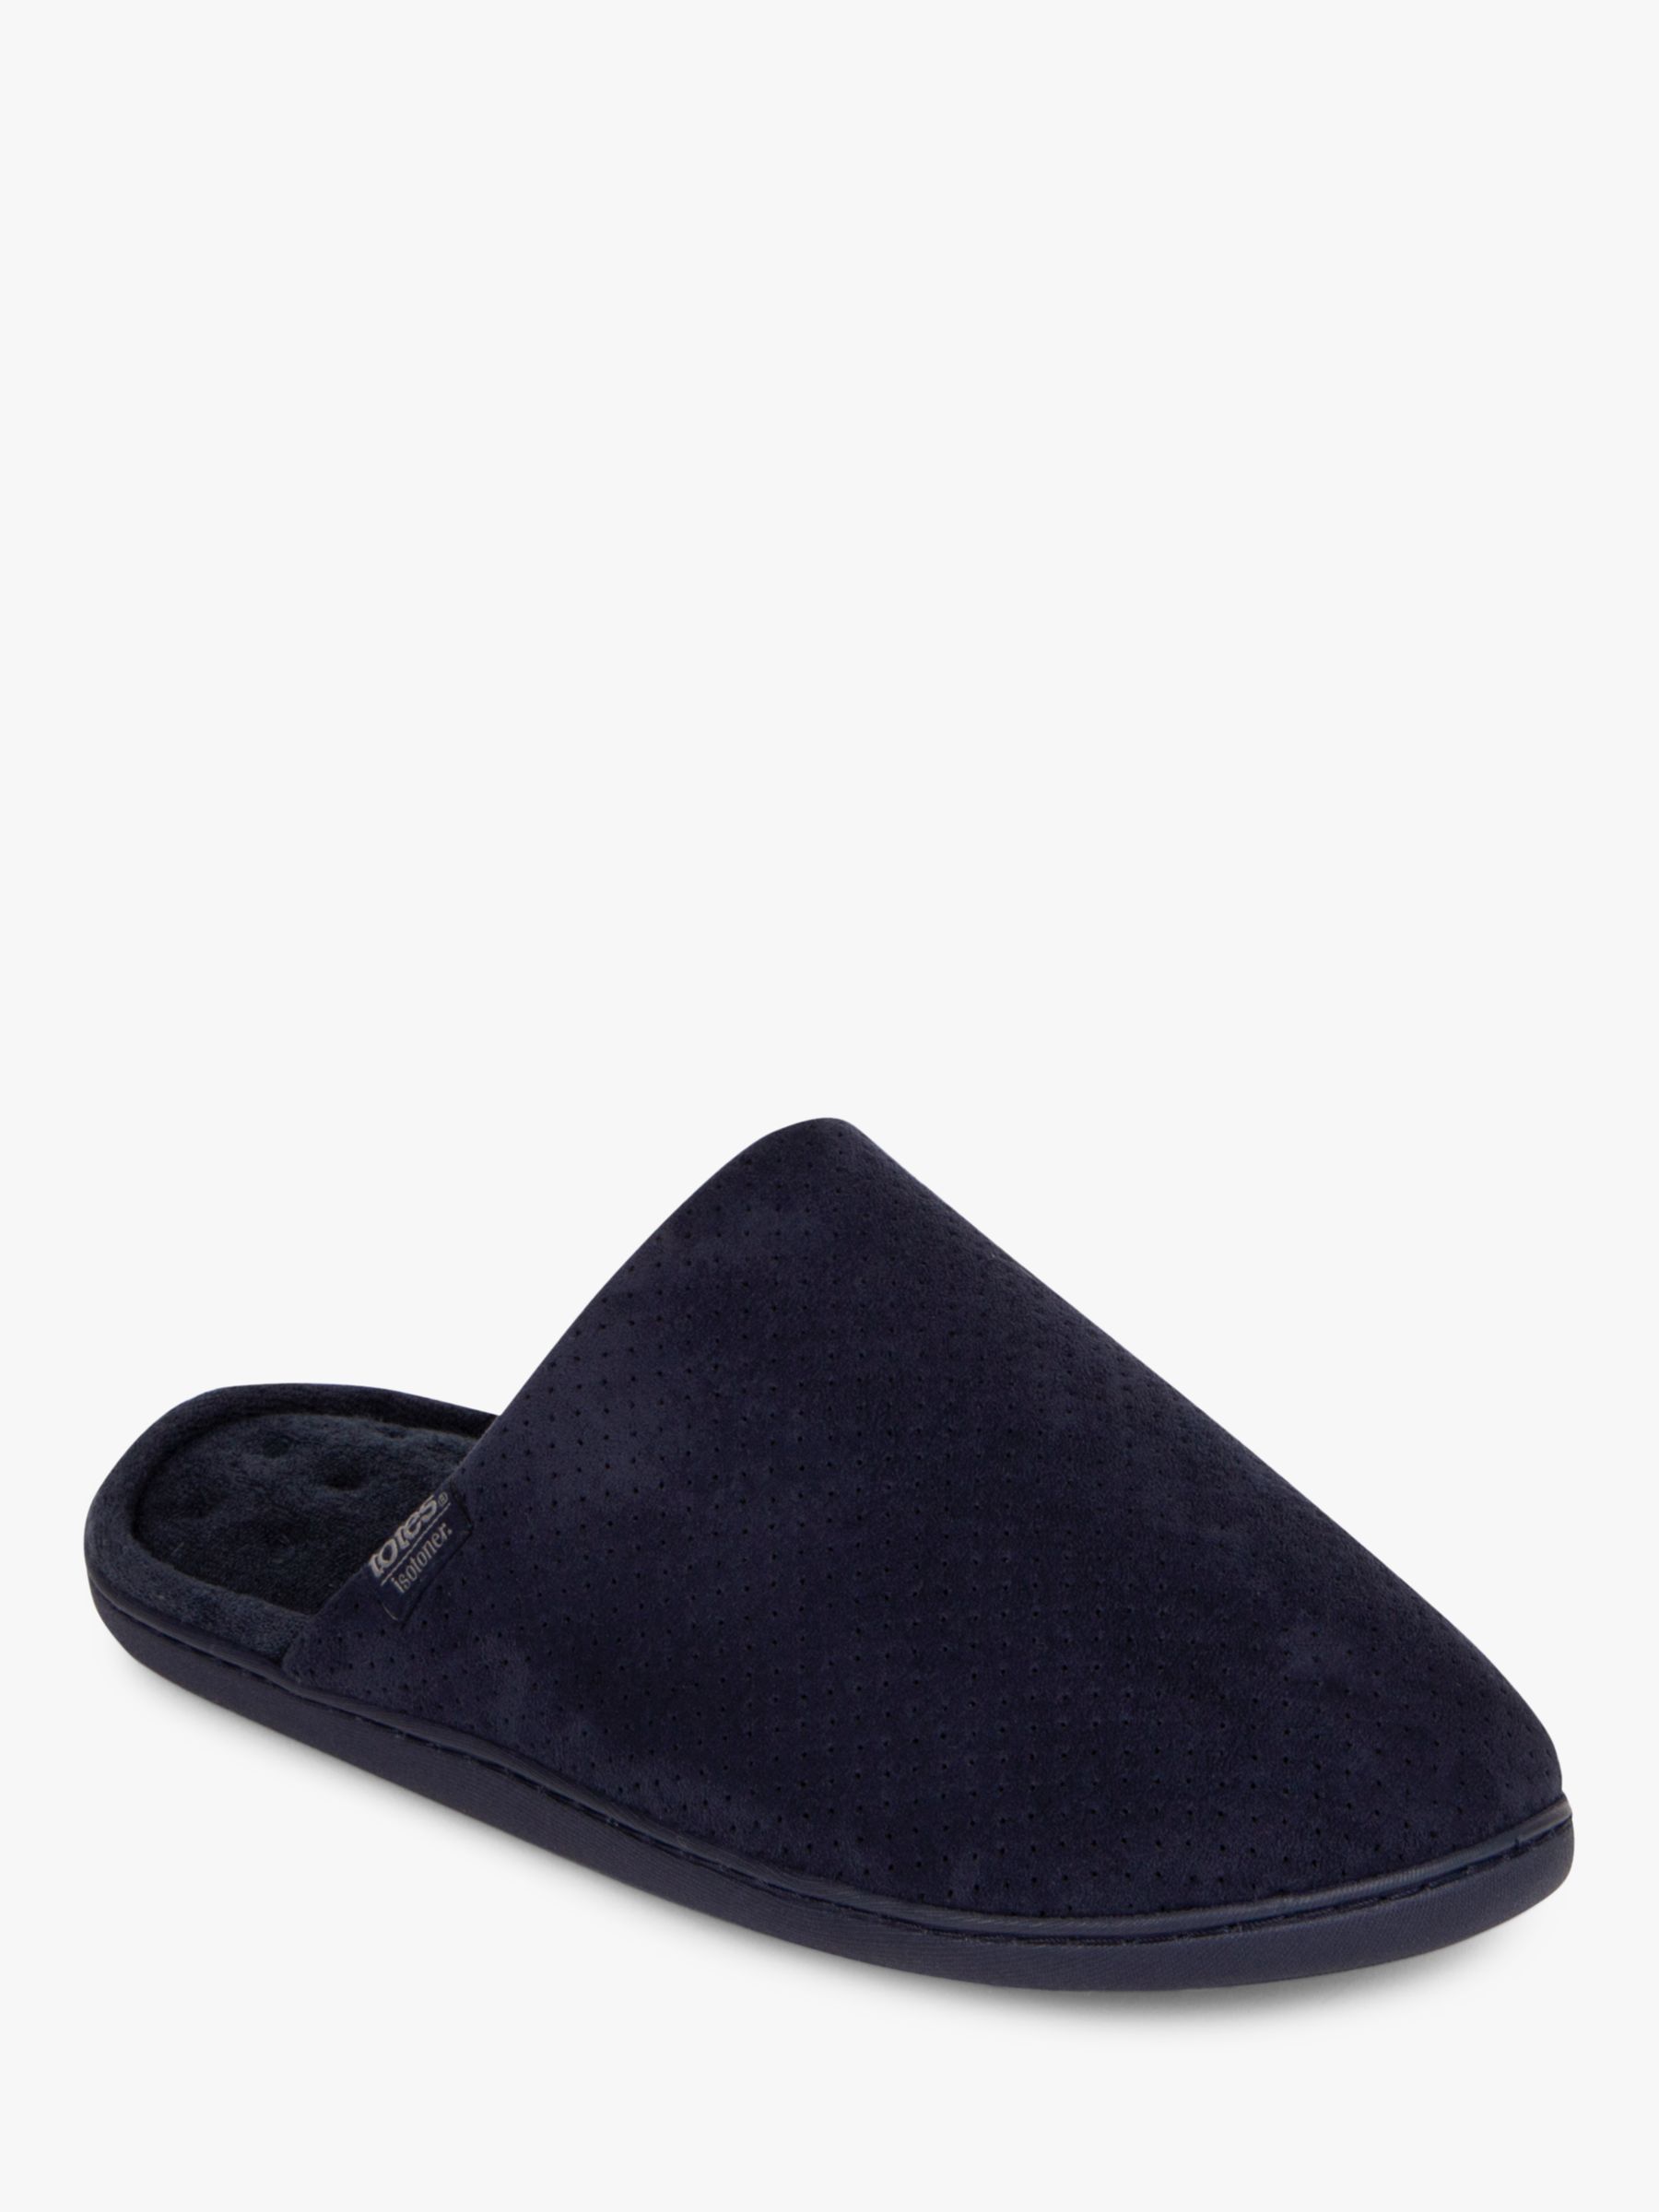 totes Airtex Suedette Mule Slippers, Navy at John Lewis & Partners